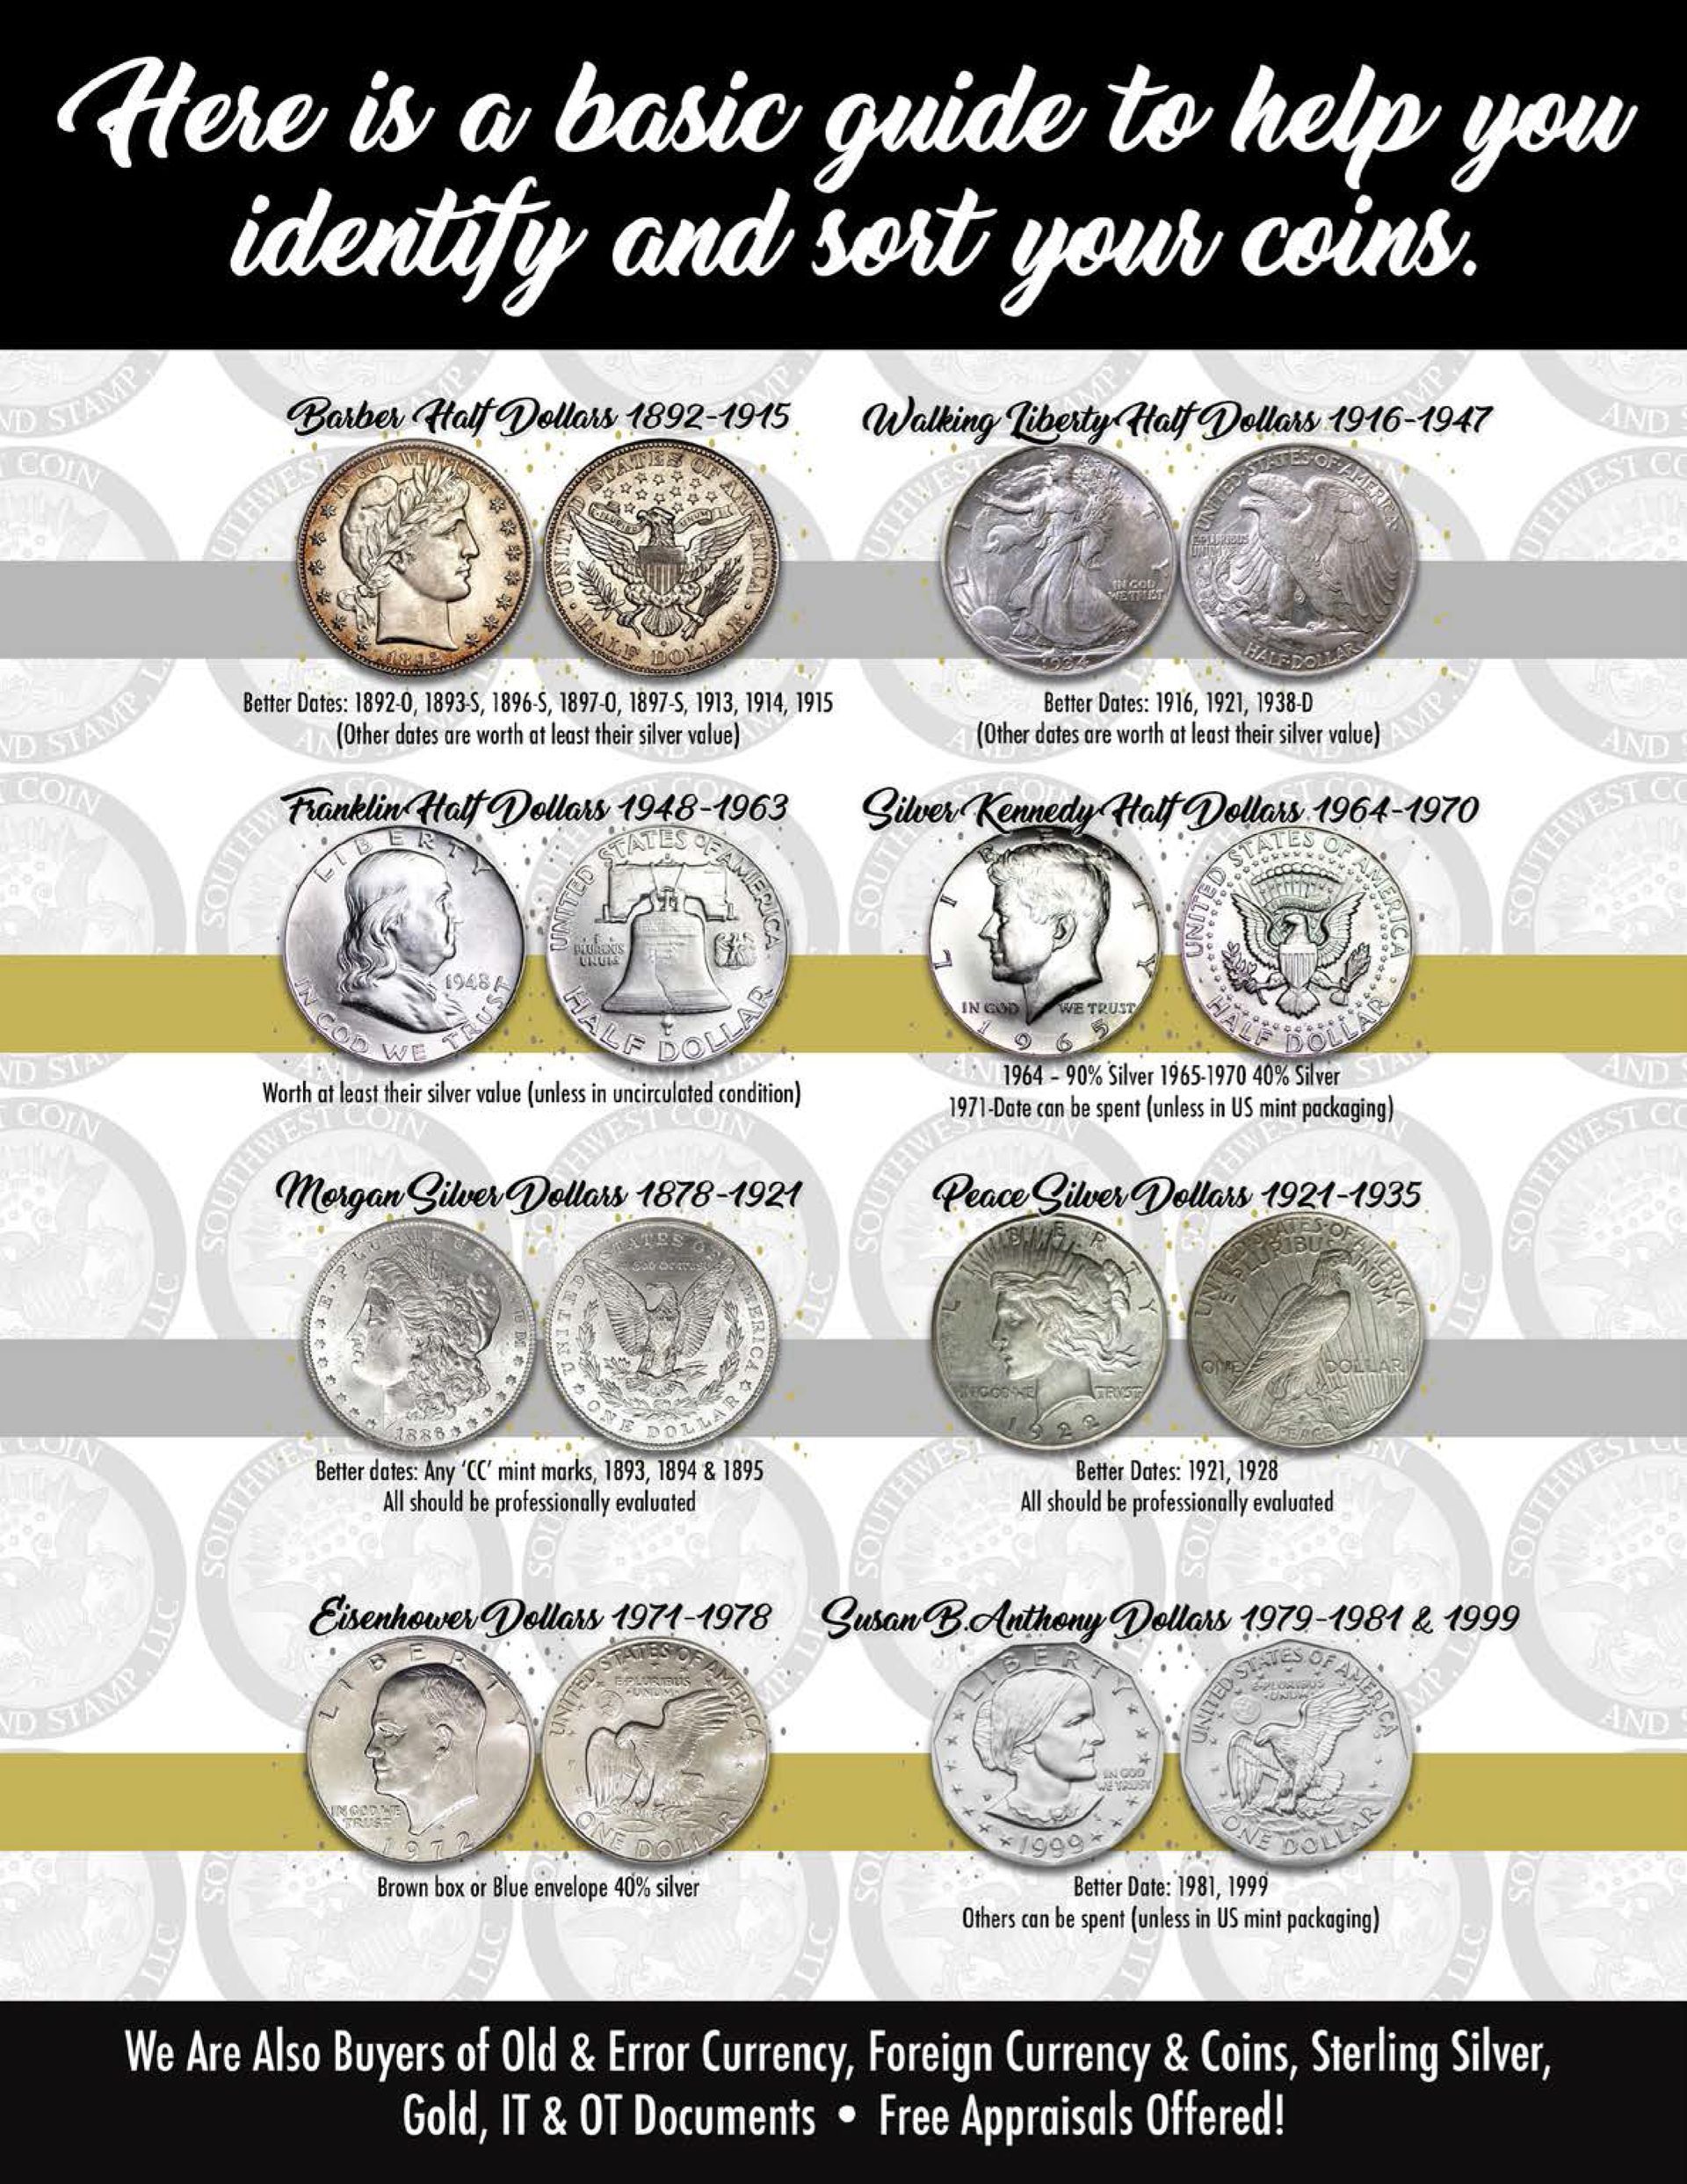 Guide to identify coins